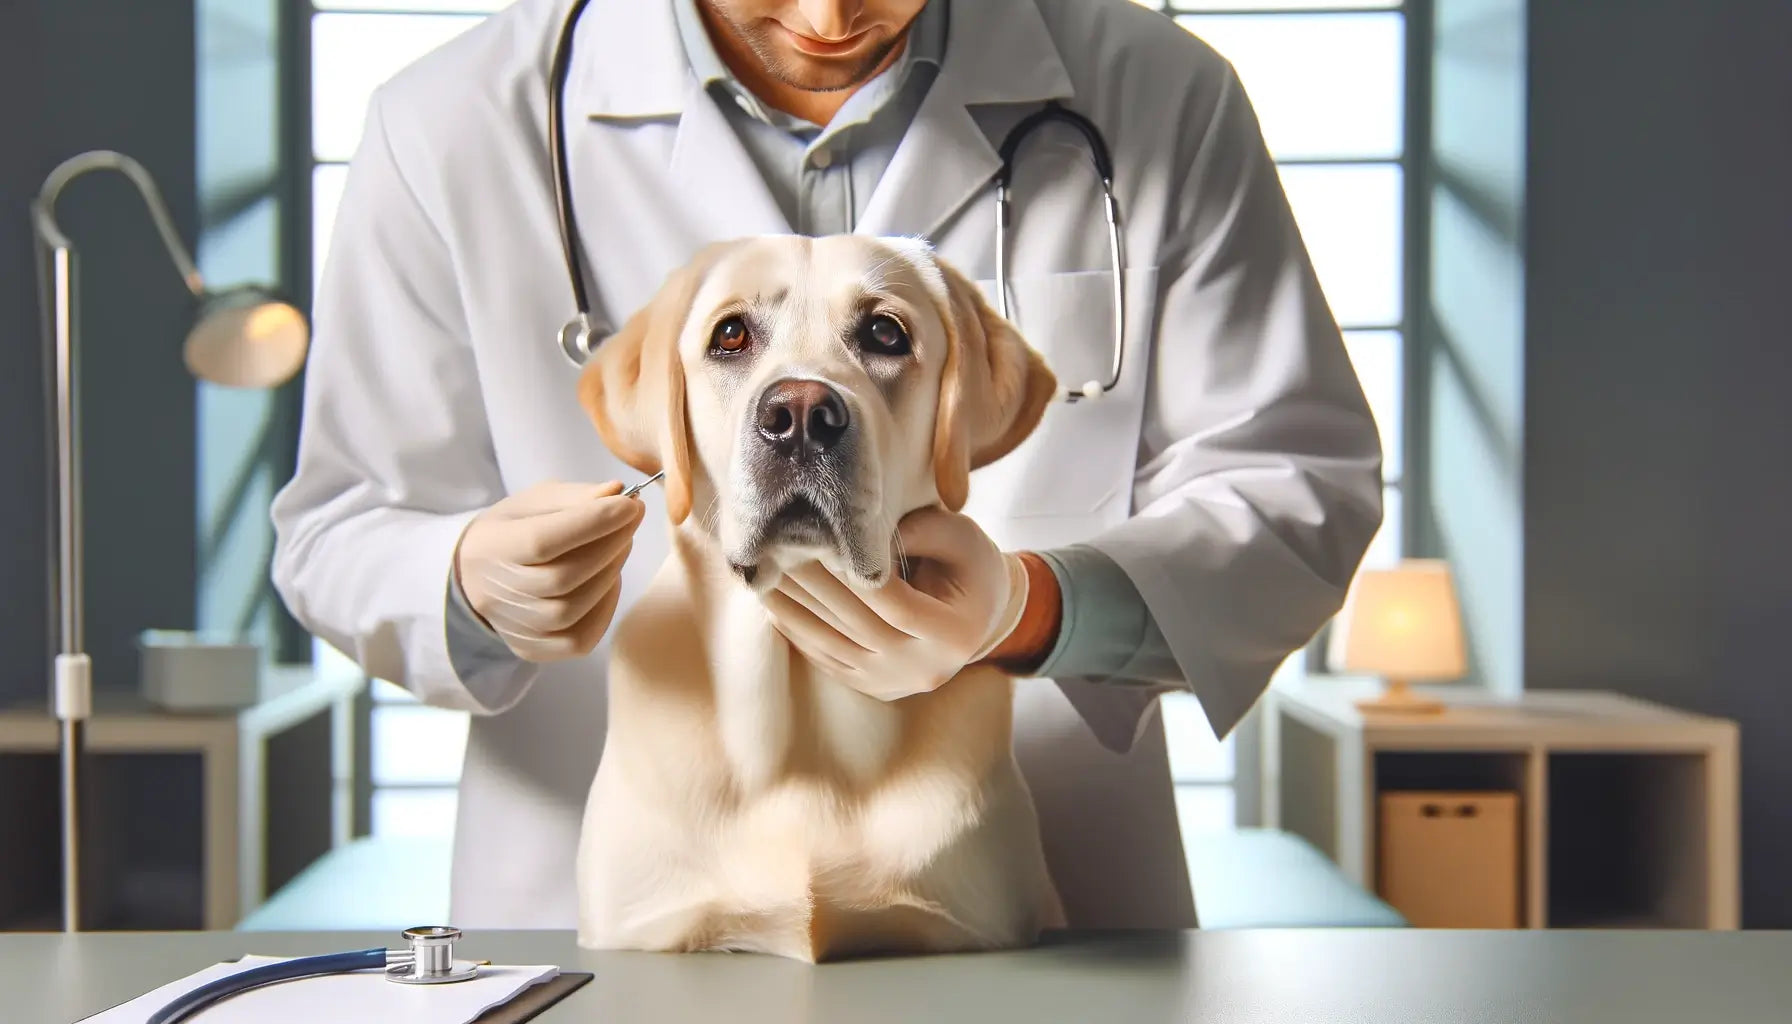 A Silver Lab receiving a health check from a veterinarian in a clinic.